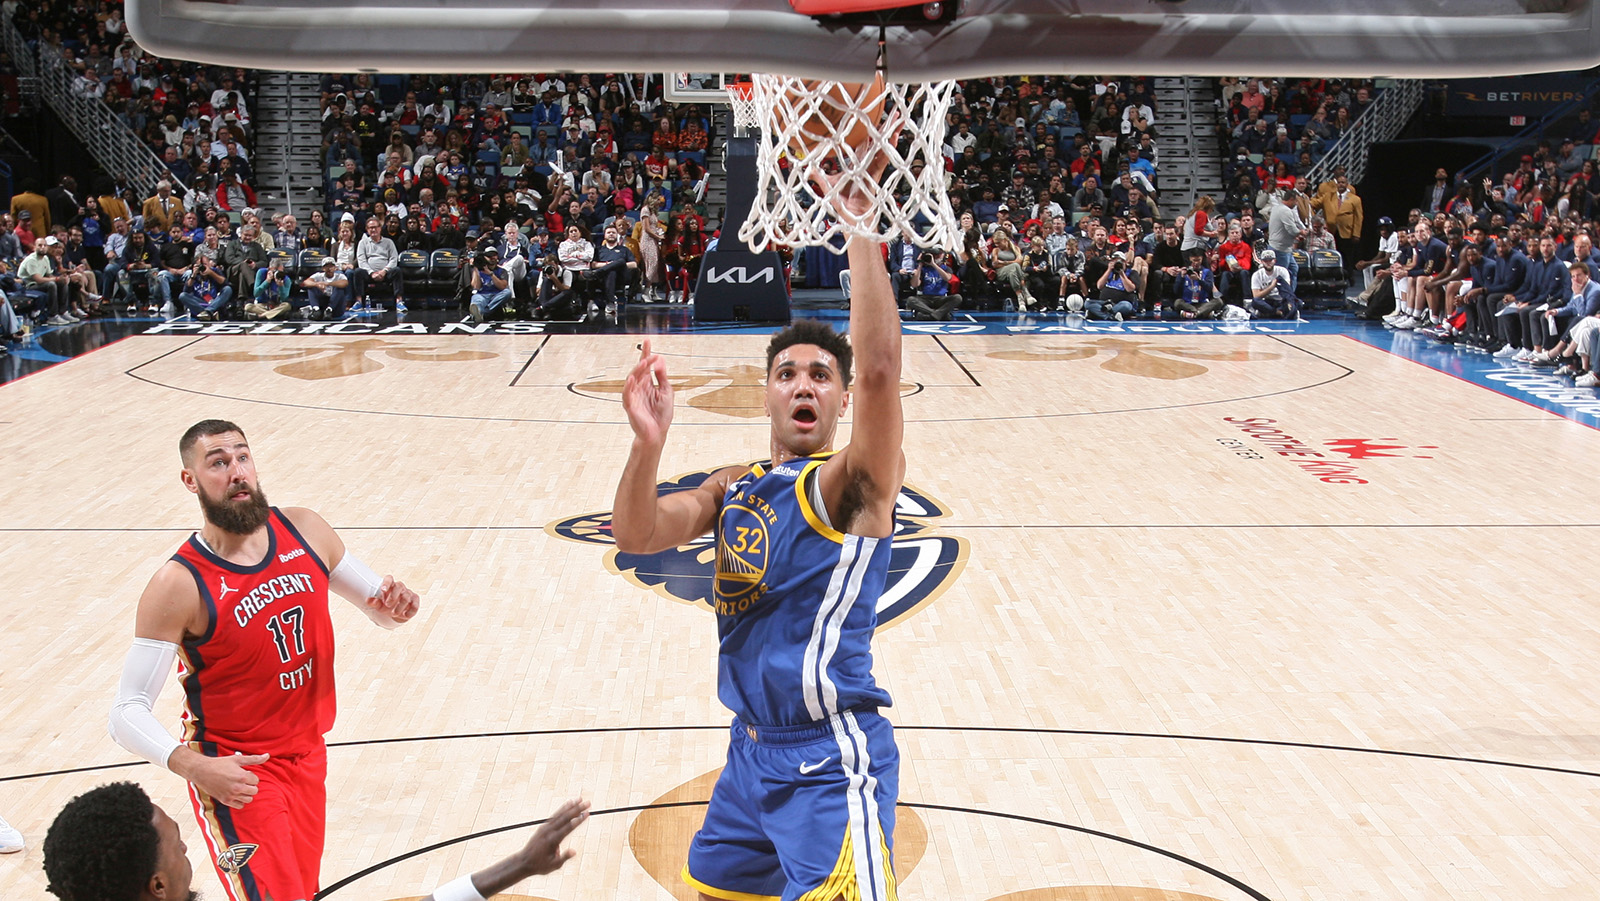 Why Trayce Jackson-Davis could be a perfect fit for Warriors